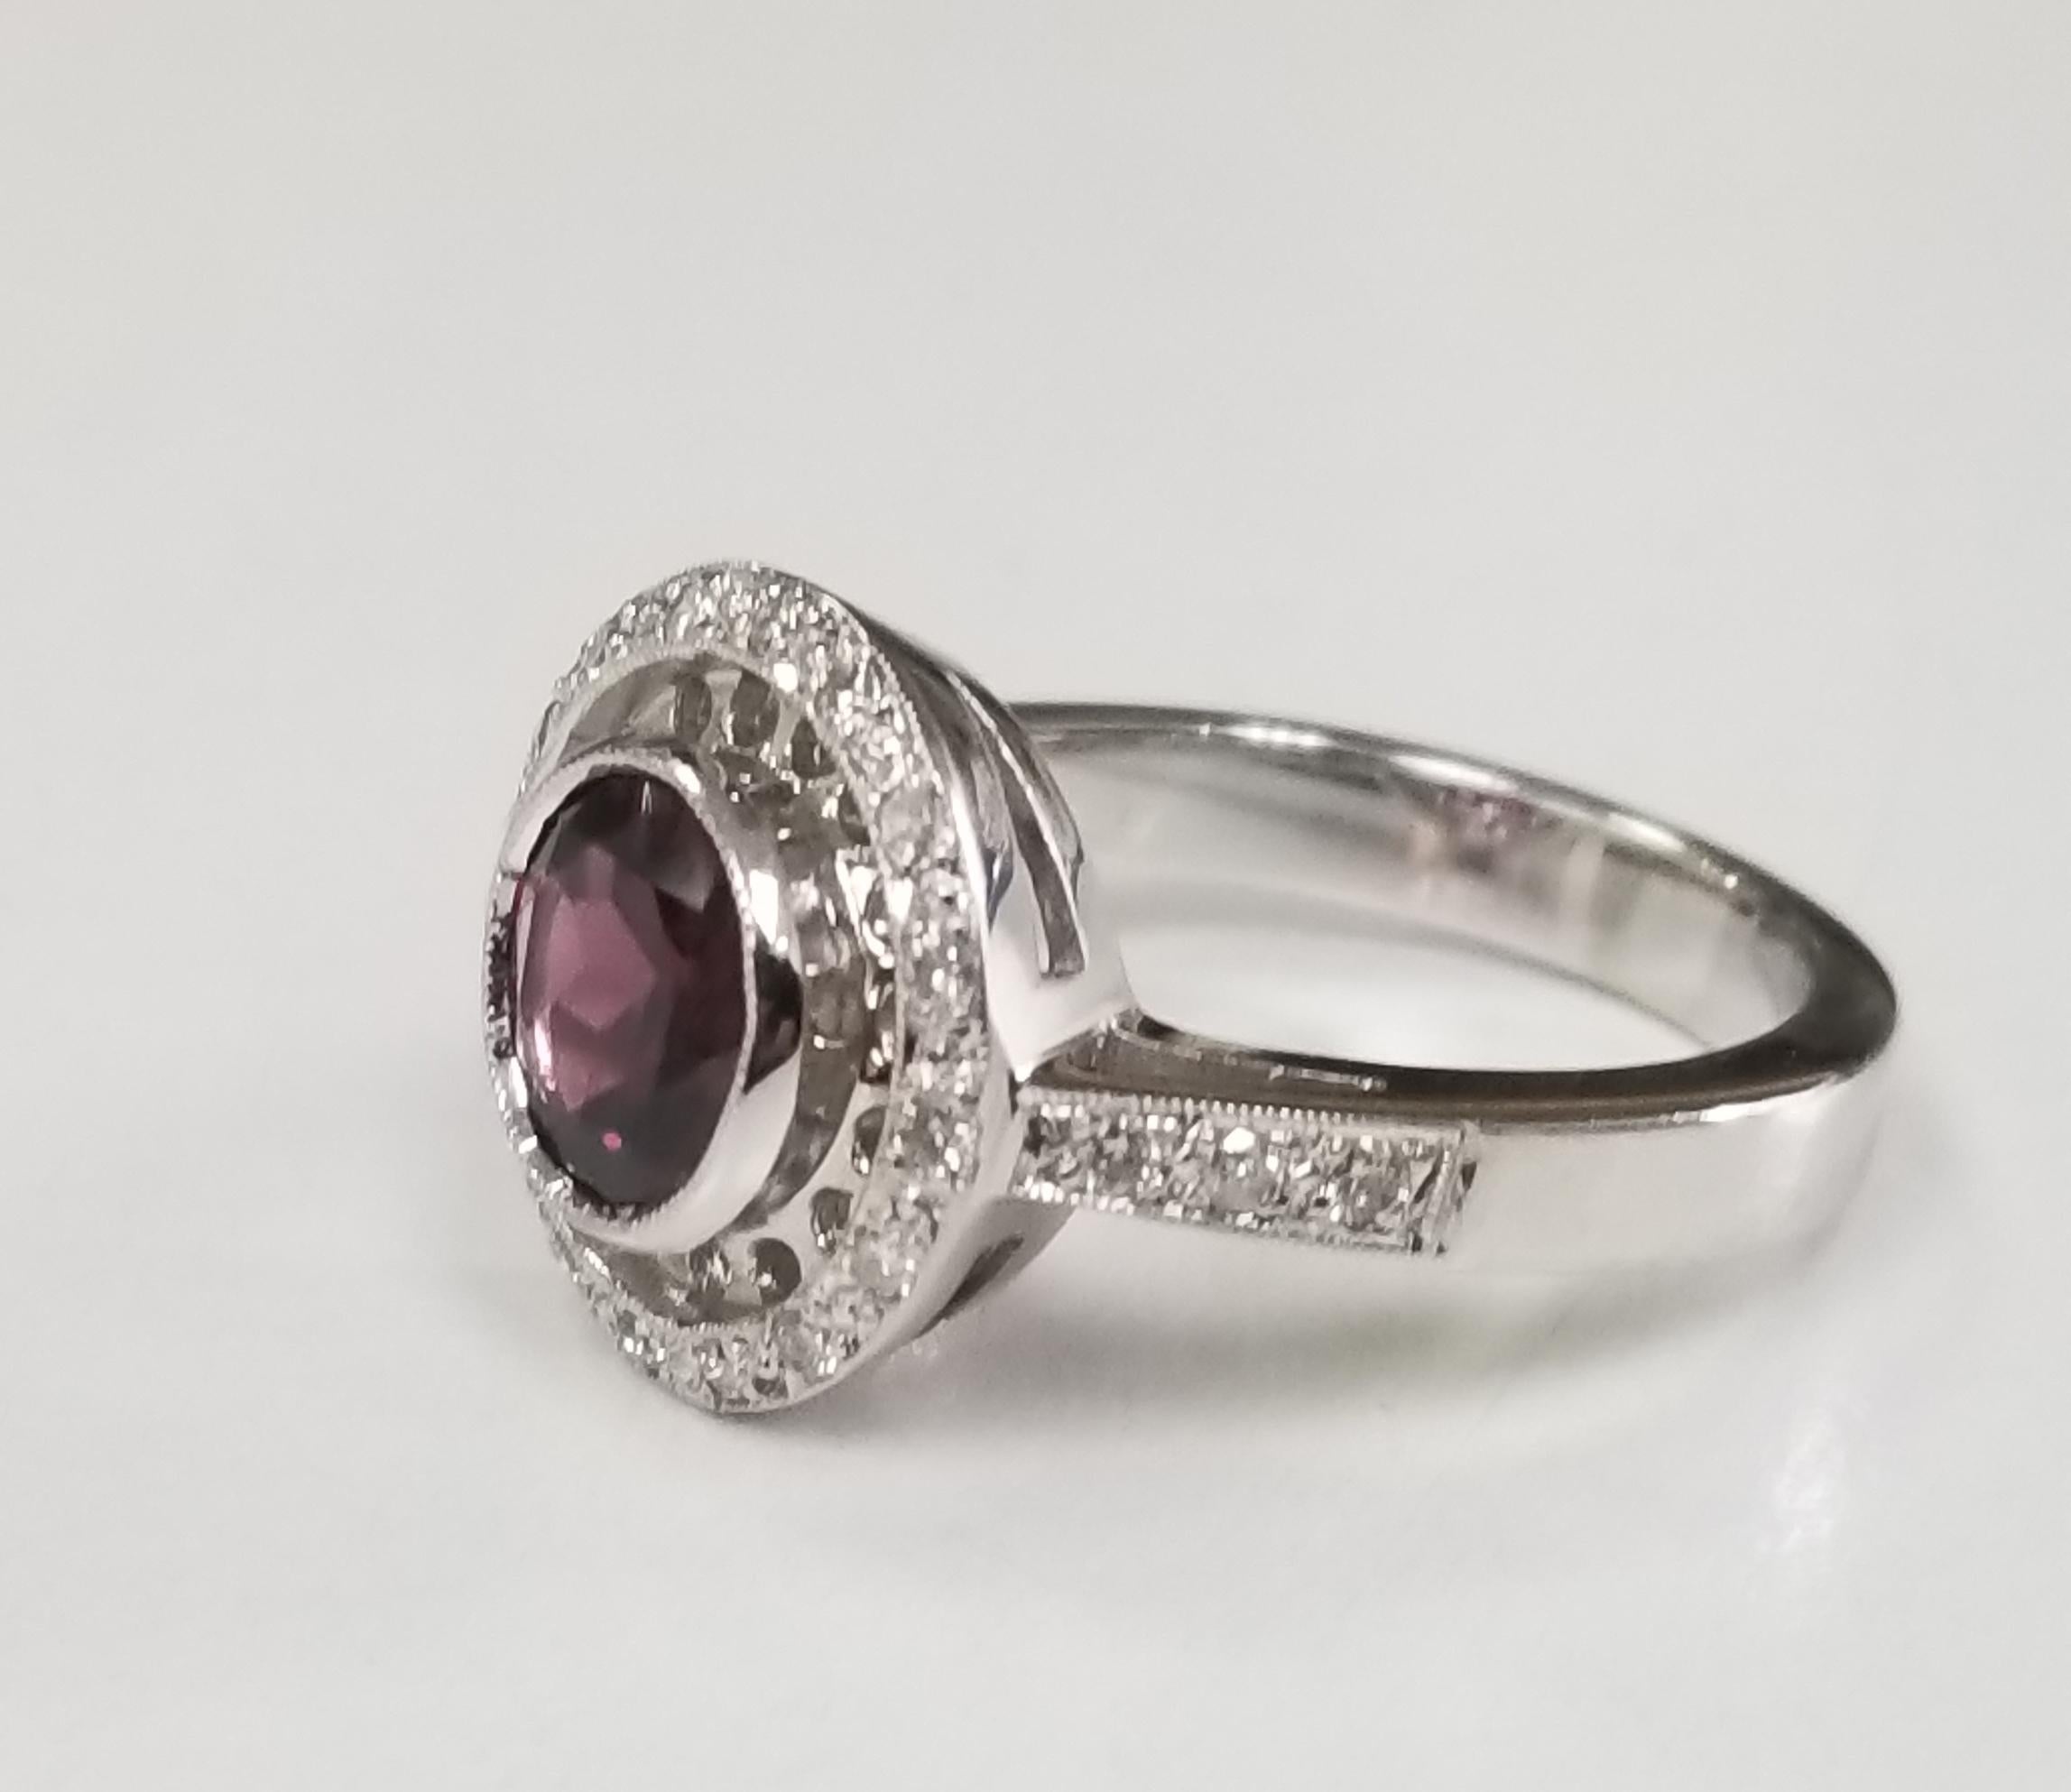 14k white gold garnet and diamond ring, containing 1 rhodolite garnet of gem quality weighing 1.29cts. and 24 round full cut diamonds of very fine quality weighing .30pts.  This ring is a size 6 but we will size to fit for free.